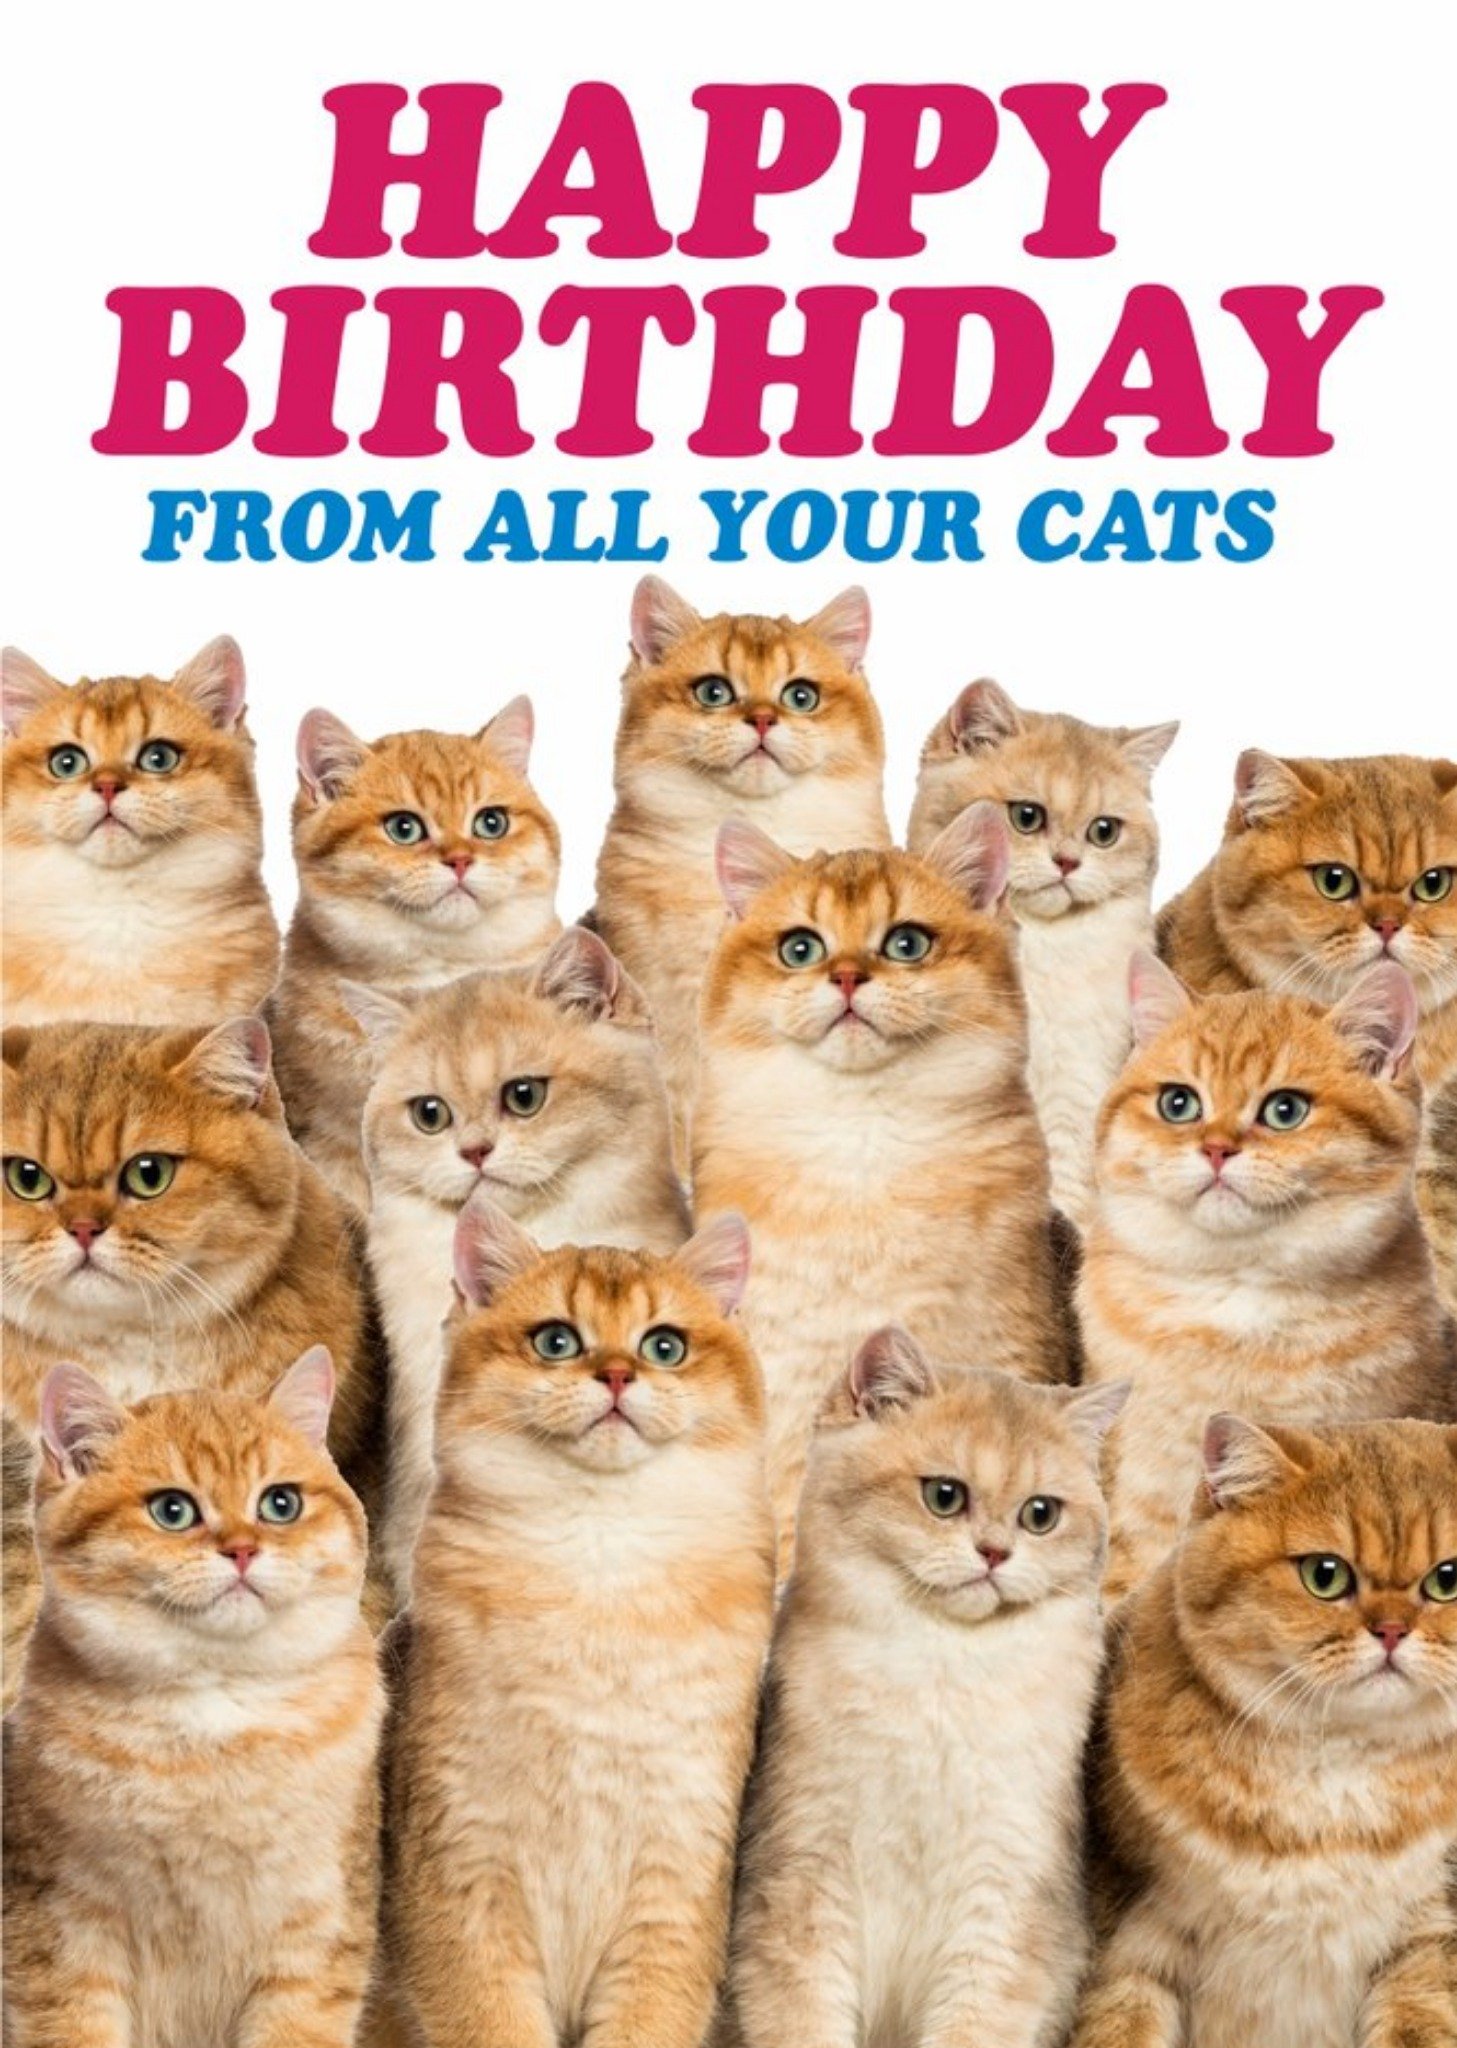 Moonpig Dean Morris From All You Cats Birthday Card, Large